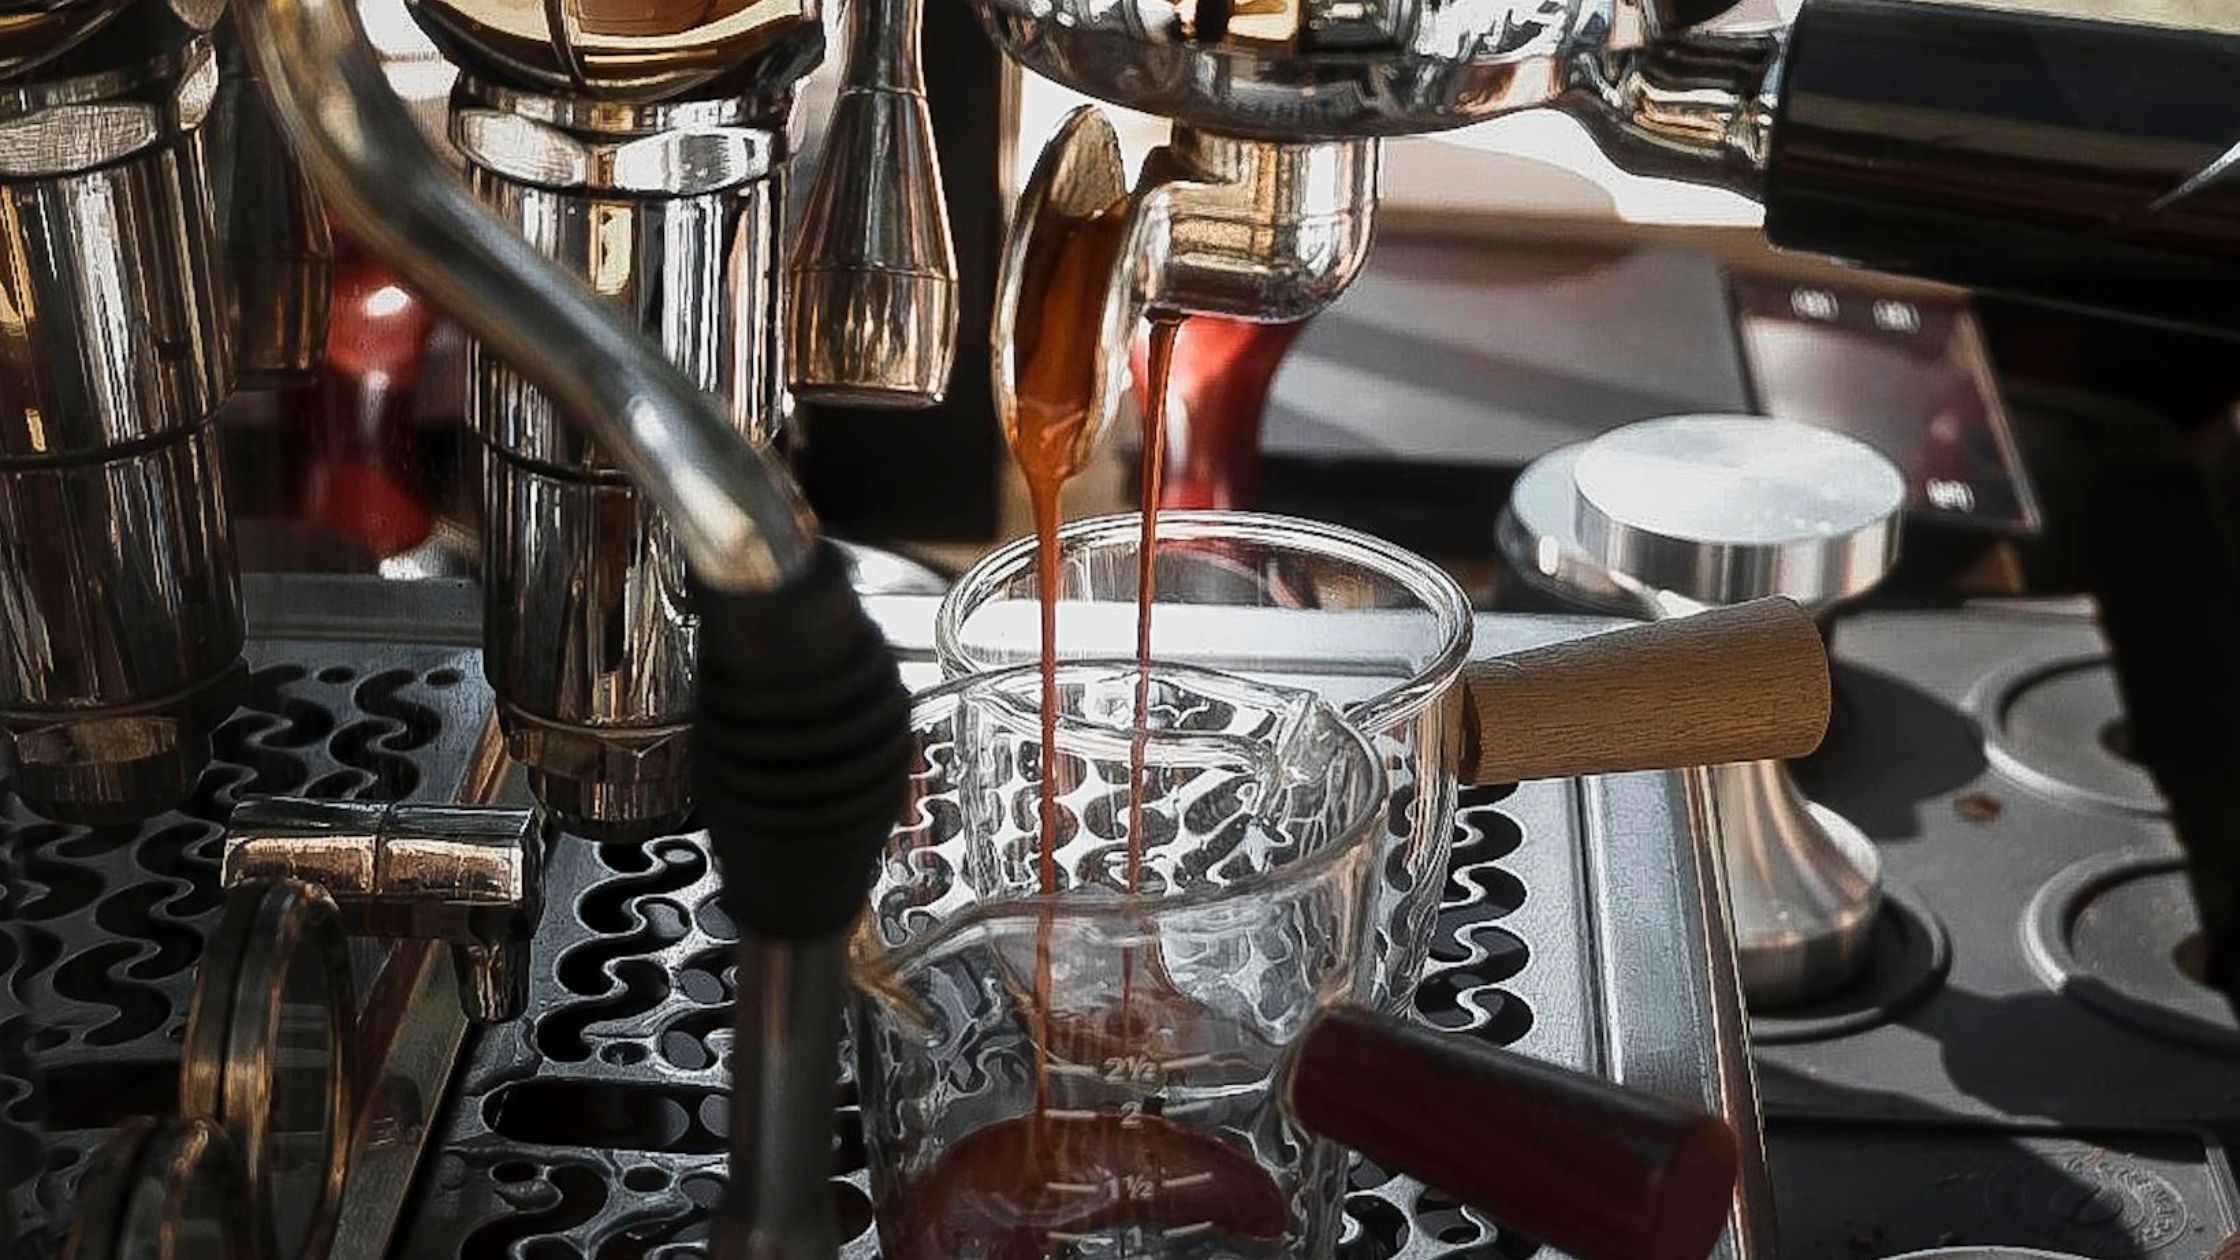 Mastering the Art of Espresso: The Role of Timing and Measurement